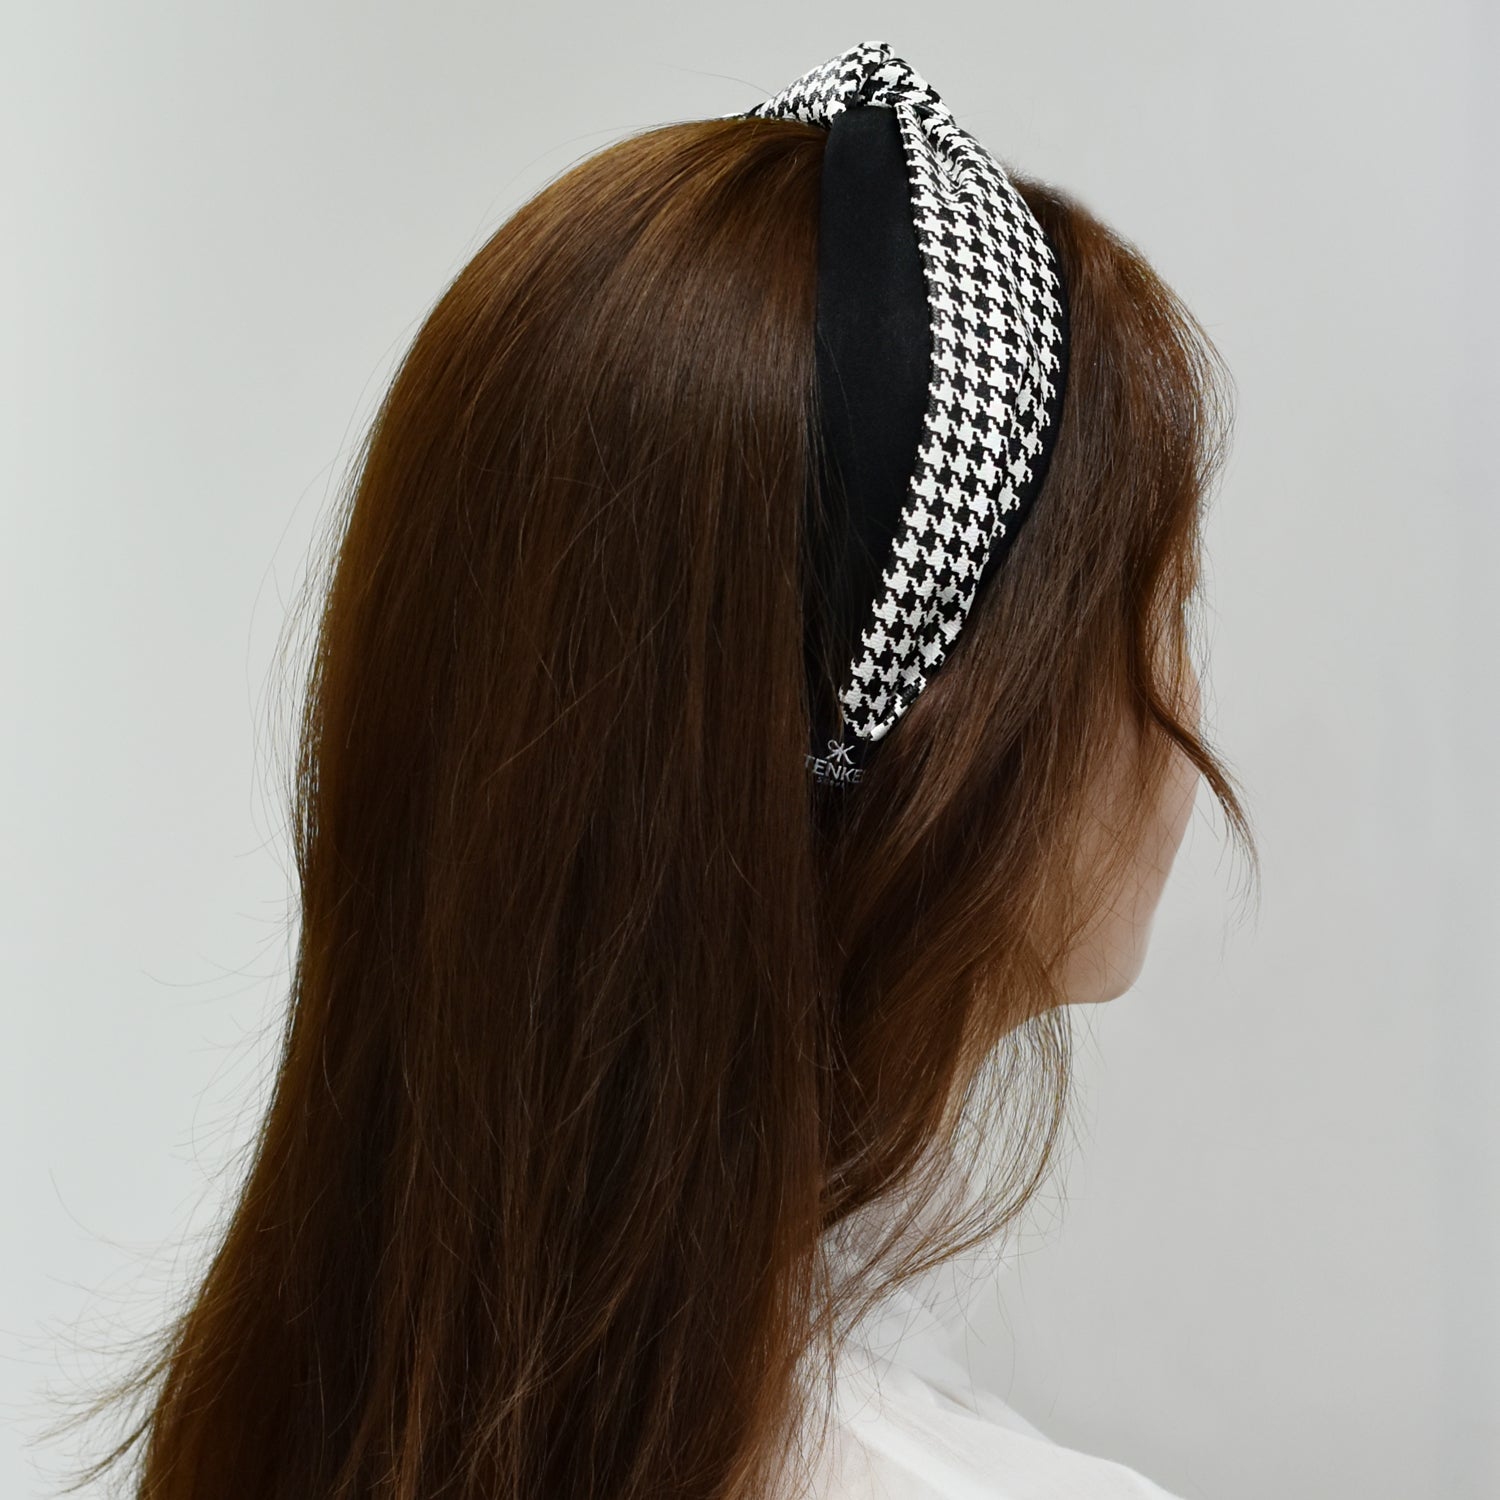 HOUNDSTOOTH CHECK HAIRBAND